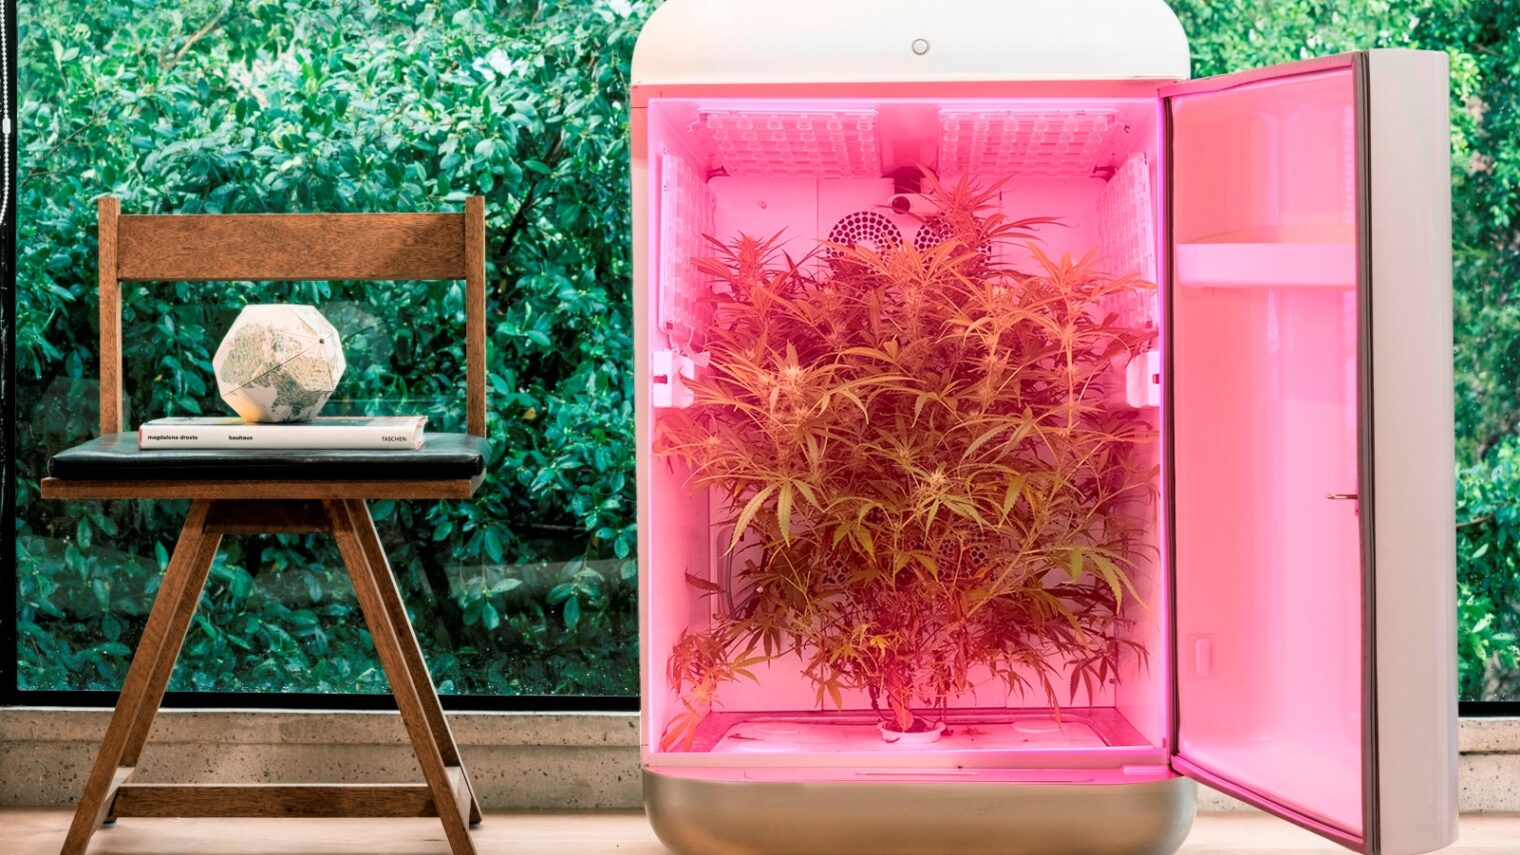 Seedo automatic hydroponic growing system is for home use. Photo: courtesy